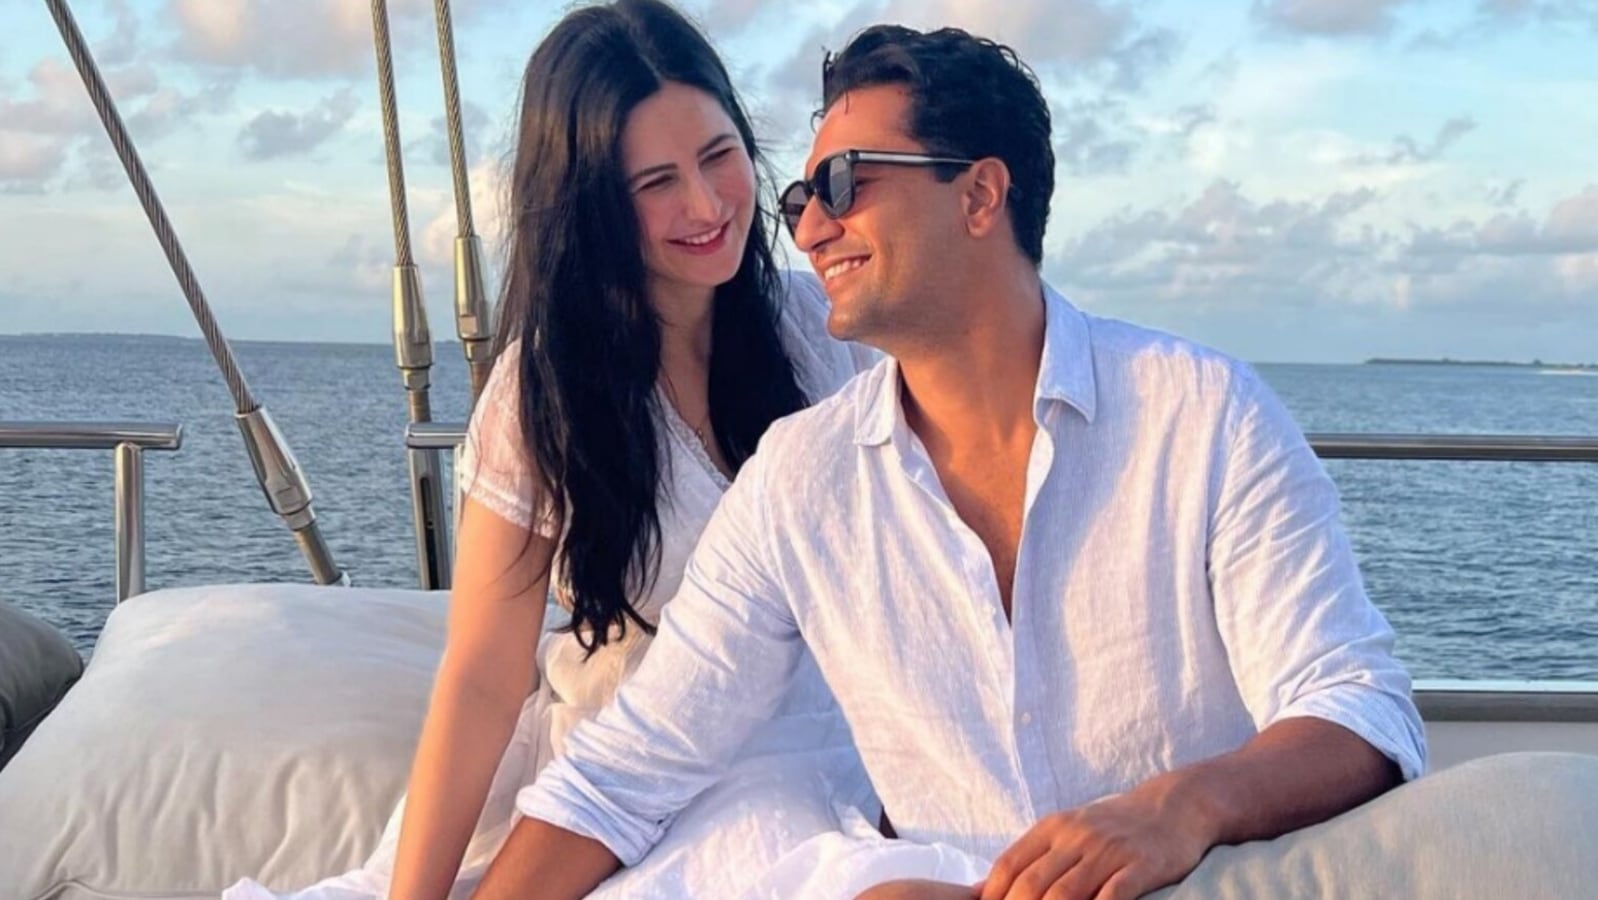 You are currently viewing Katrina Kaif, Vicky Kaushal finally make a joint appearance in pic from Maldives